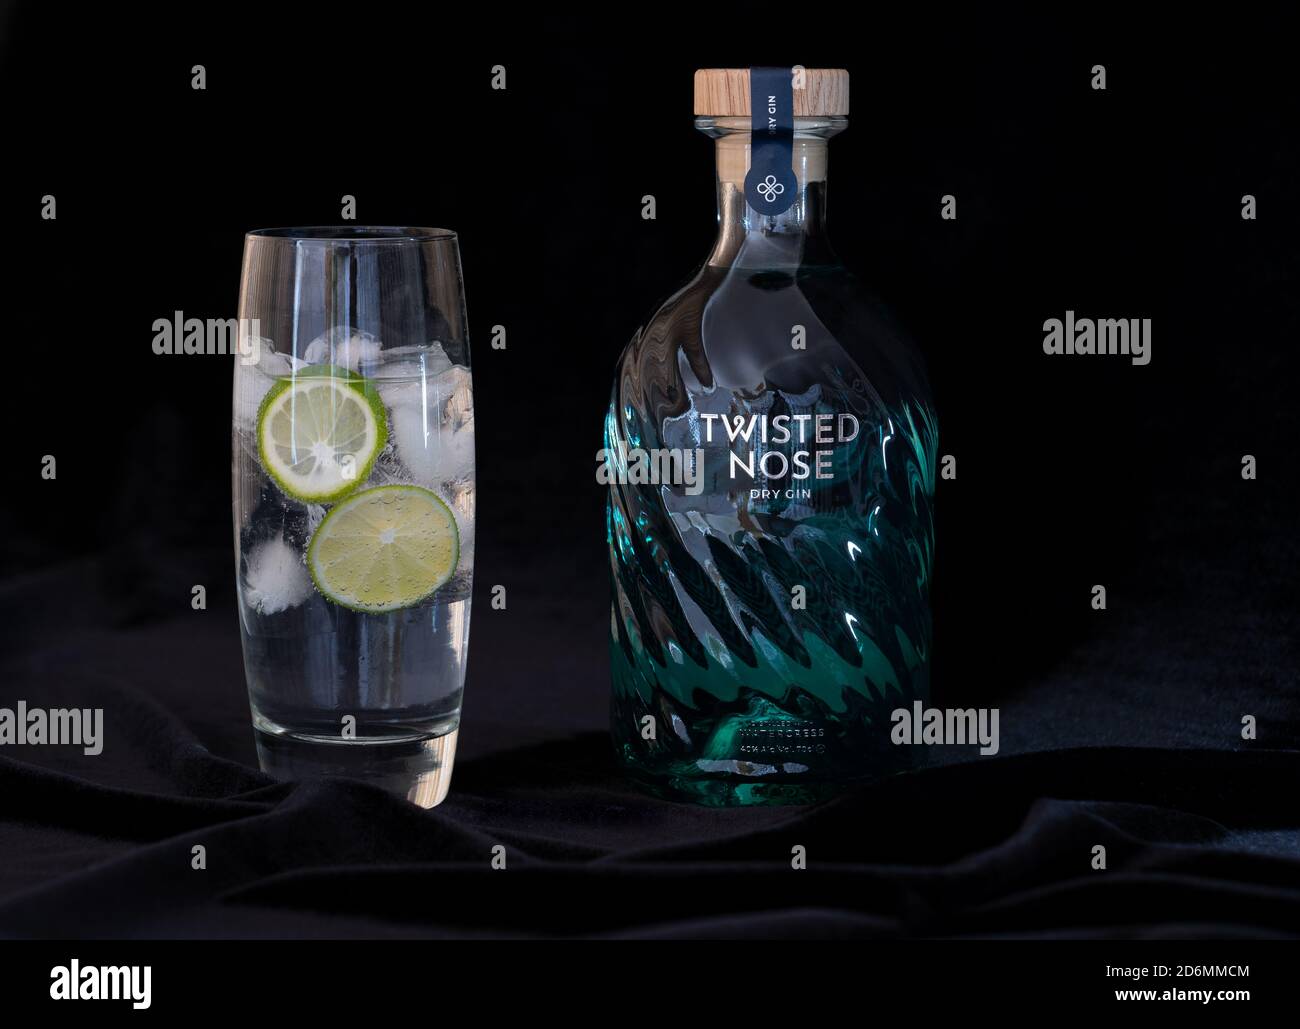 Still life of Twisted Nose gin brand bottle and glass with tonic, ice and lime on black velvet background Stock Photo